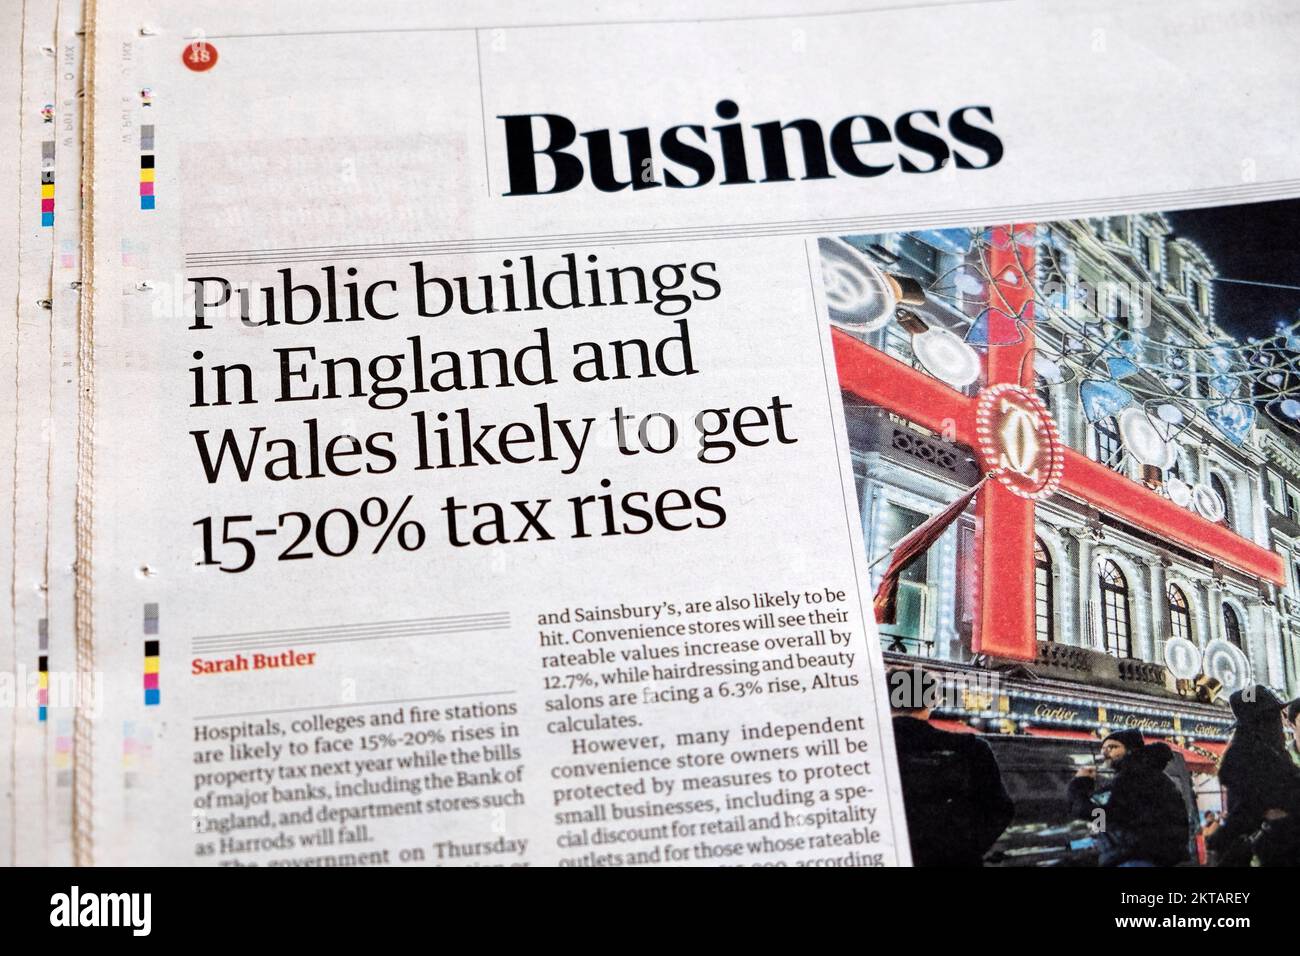 'Public buildings in England and Wales likely to get 15% 20% tax rises' Guardian Business section newspaper headline property tax rise article 2022 UK Stock Photo